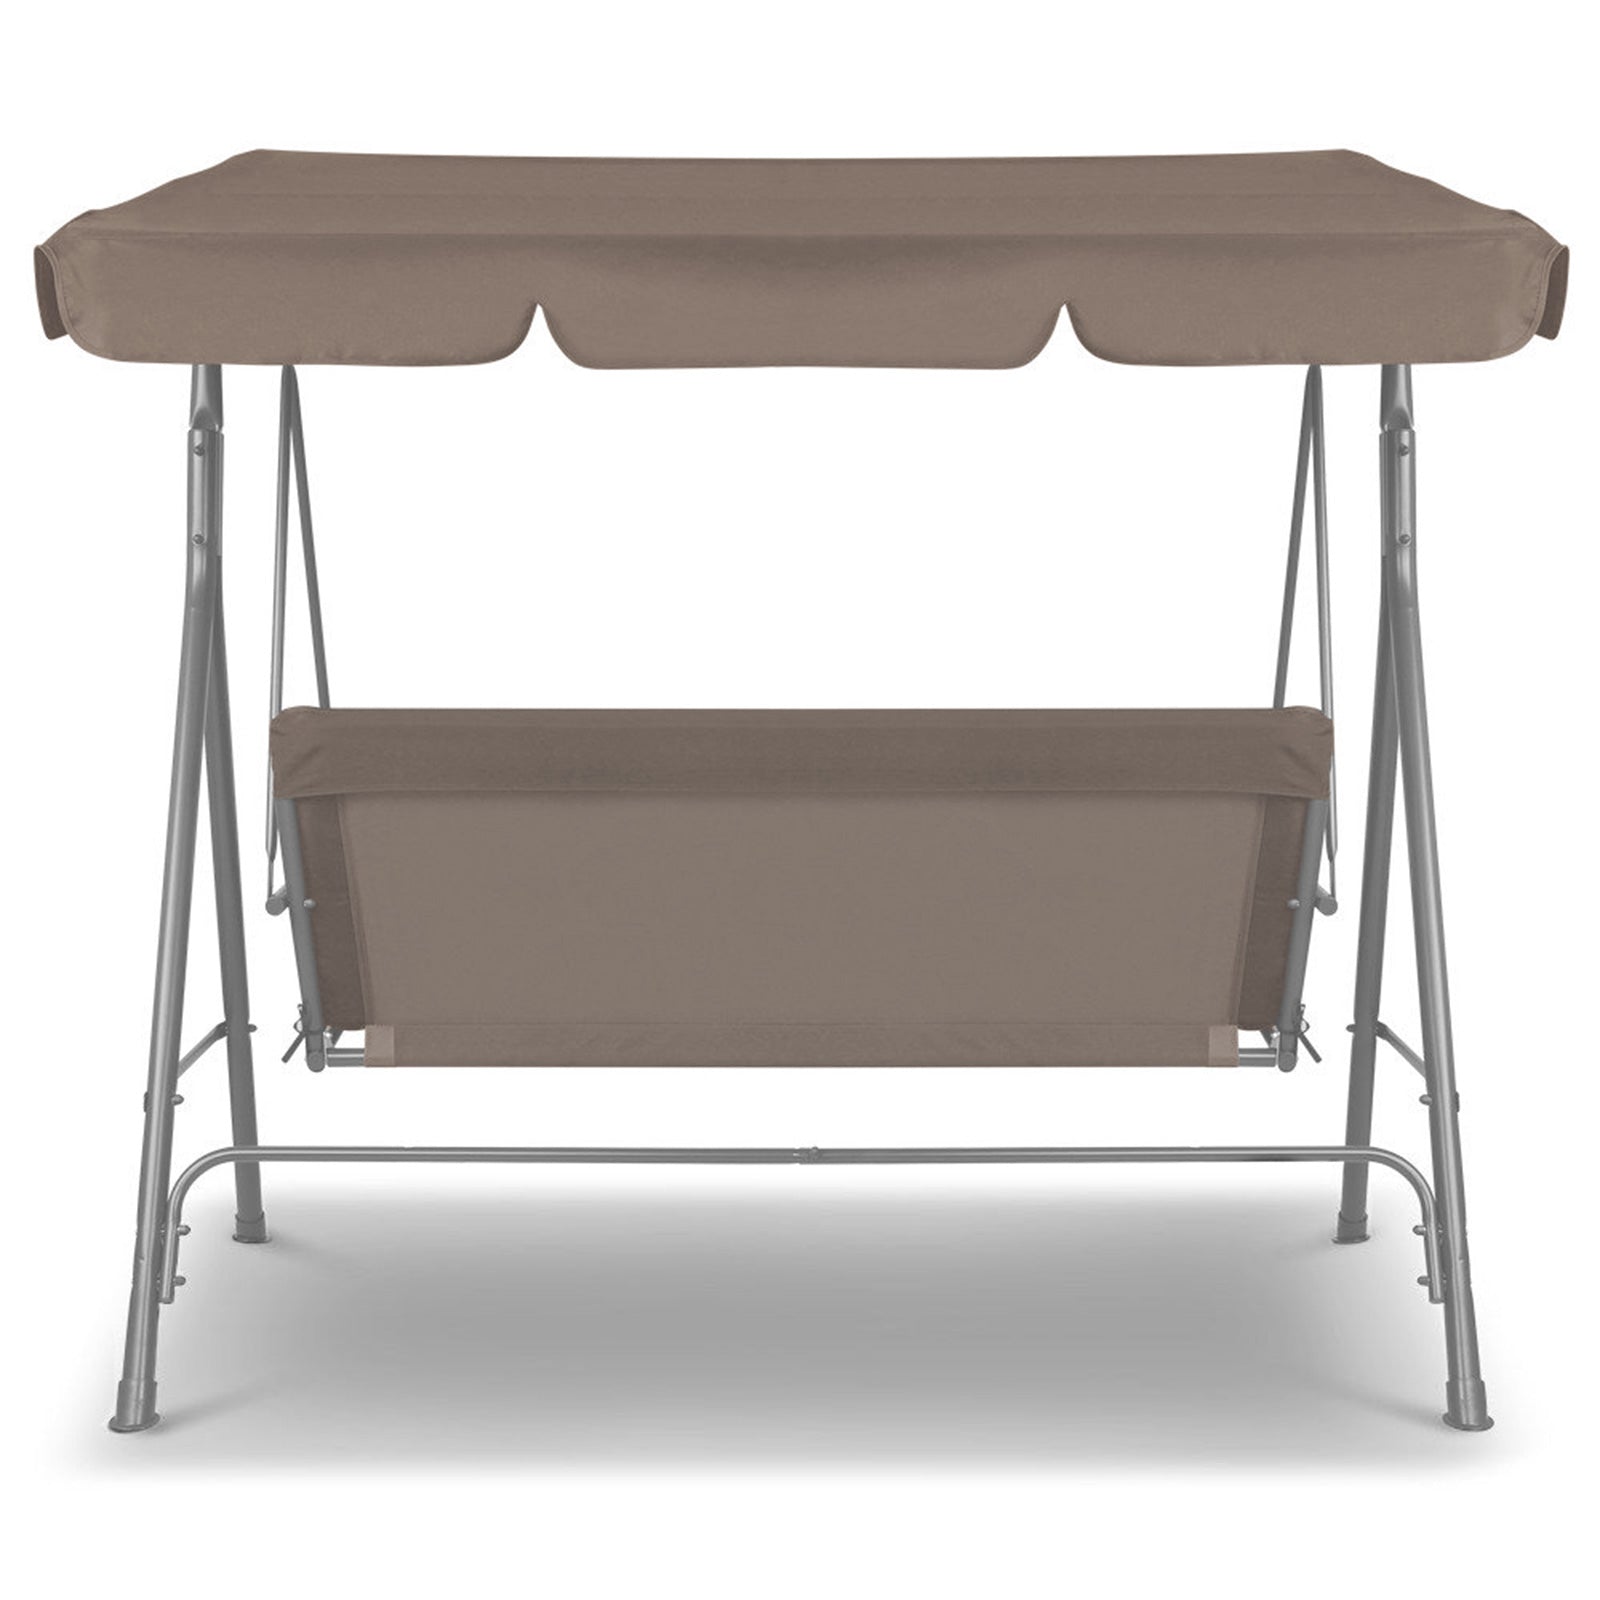 Milano Outdoor Swing Bench Seat Chair Canopy Furniture 3 Seater Garden Hammock - Coffee - image5